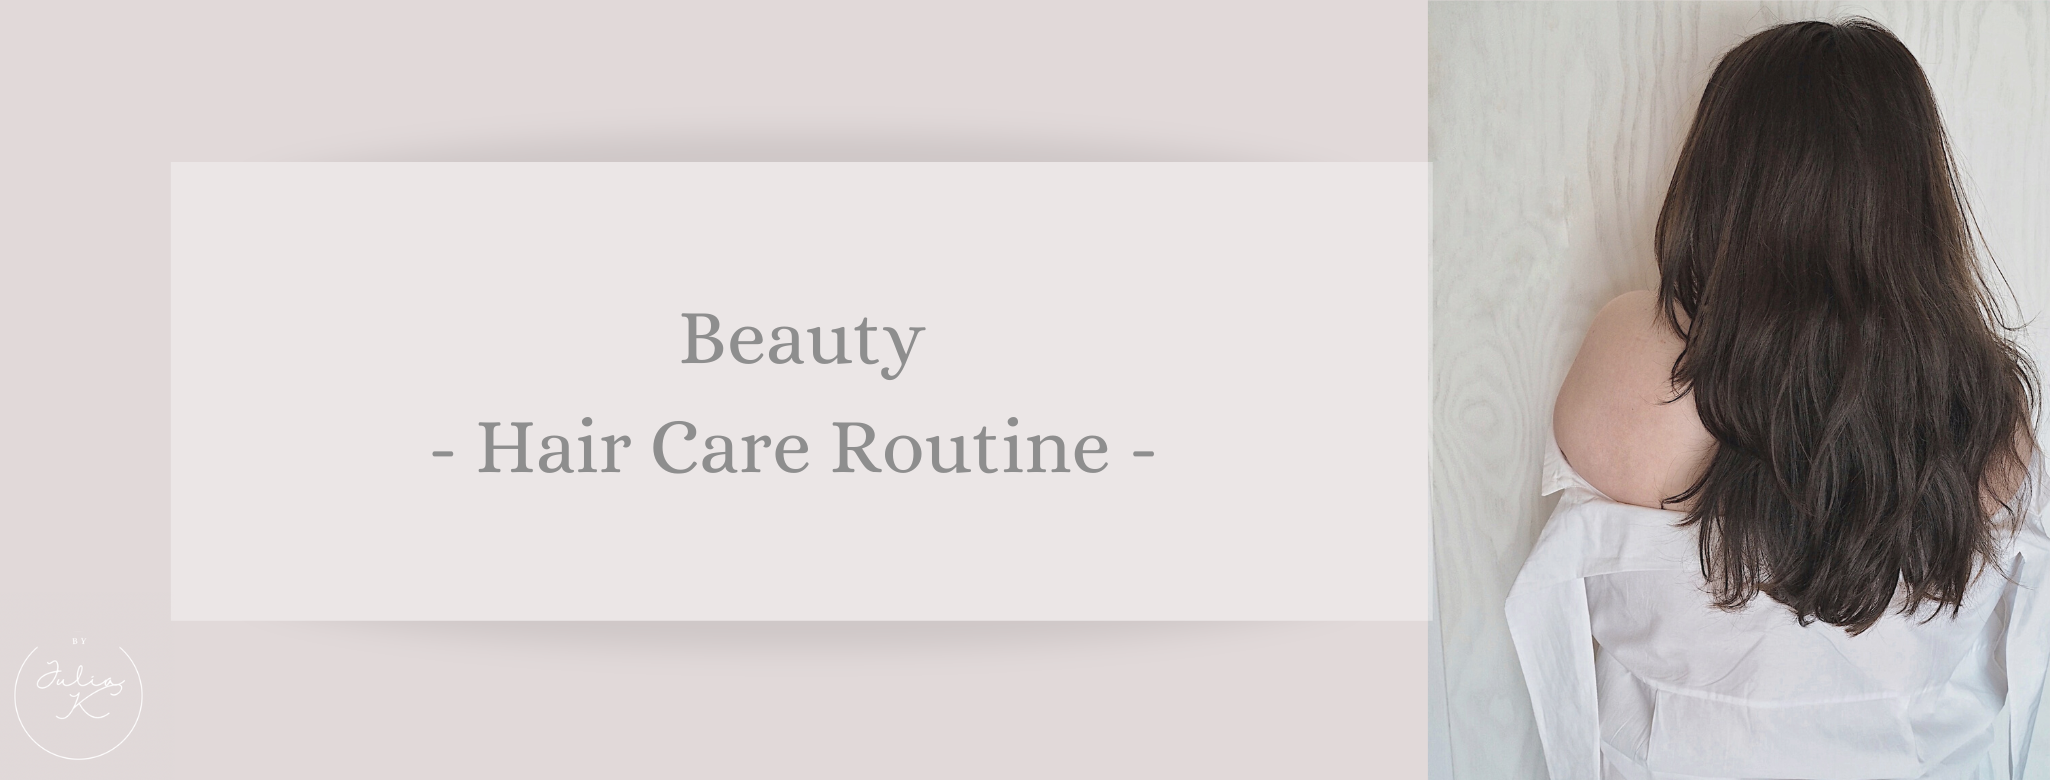 Beauty: Hair Care Routine